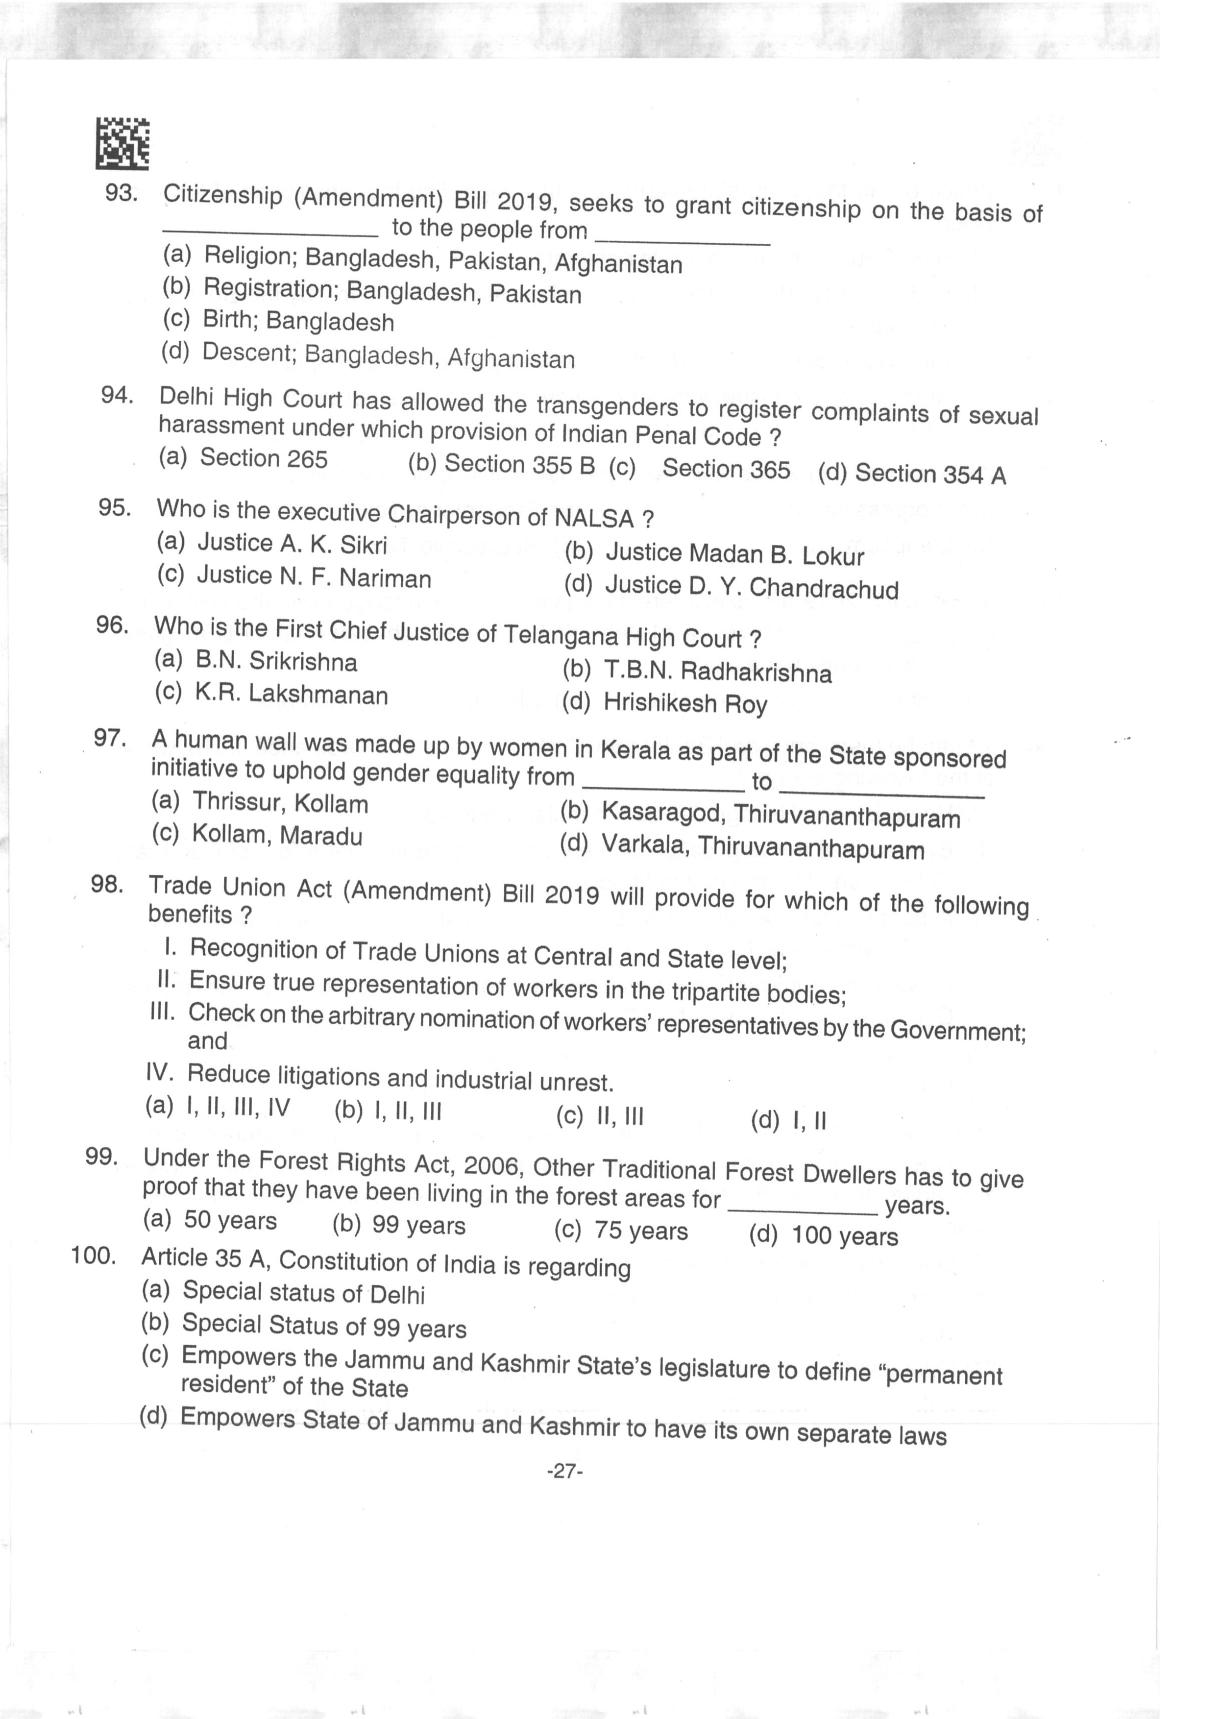 AILET 2019 Question Paper for BA LLB - Page 27